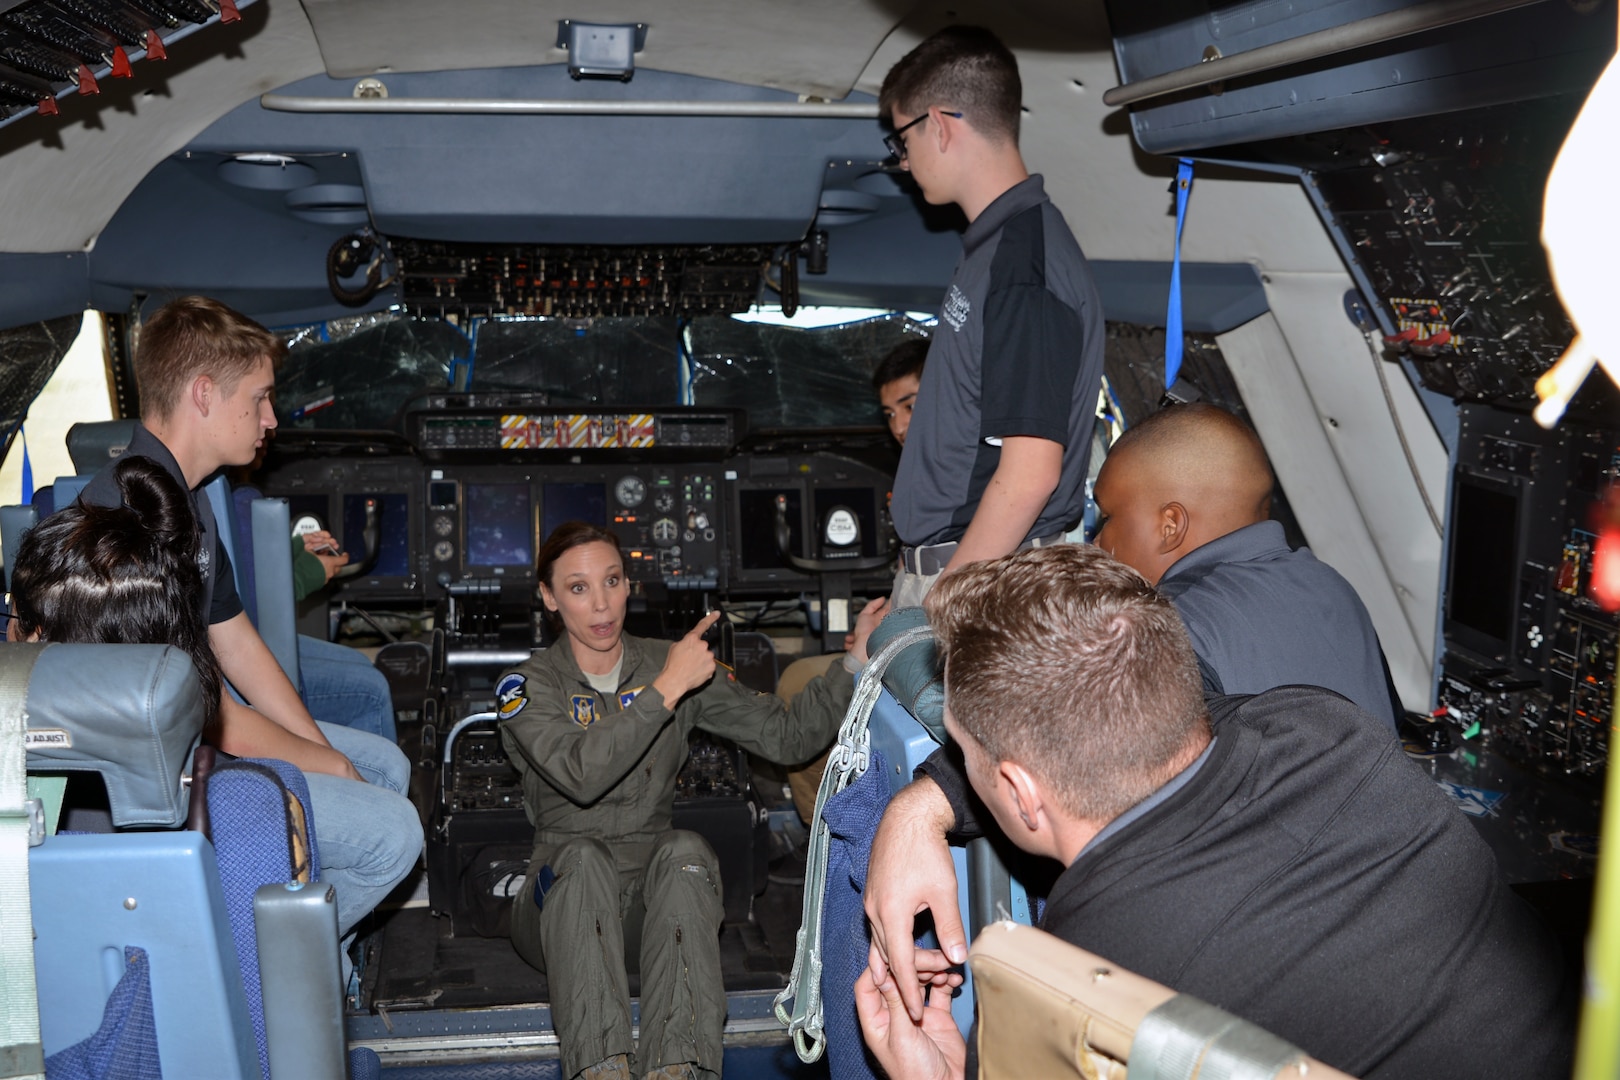 Lt. Col. Brandi B. King, 356th Airlift Squadron instructor pilot with the 433rd Airlift Wing, describes C-5M Super Galaxy flight deck functions to a group of Texas A&M University Reserve Officer Training Corps students and instructors at Joint Base San Antonio-Lackland, Texas Nov. 6, 2018.